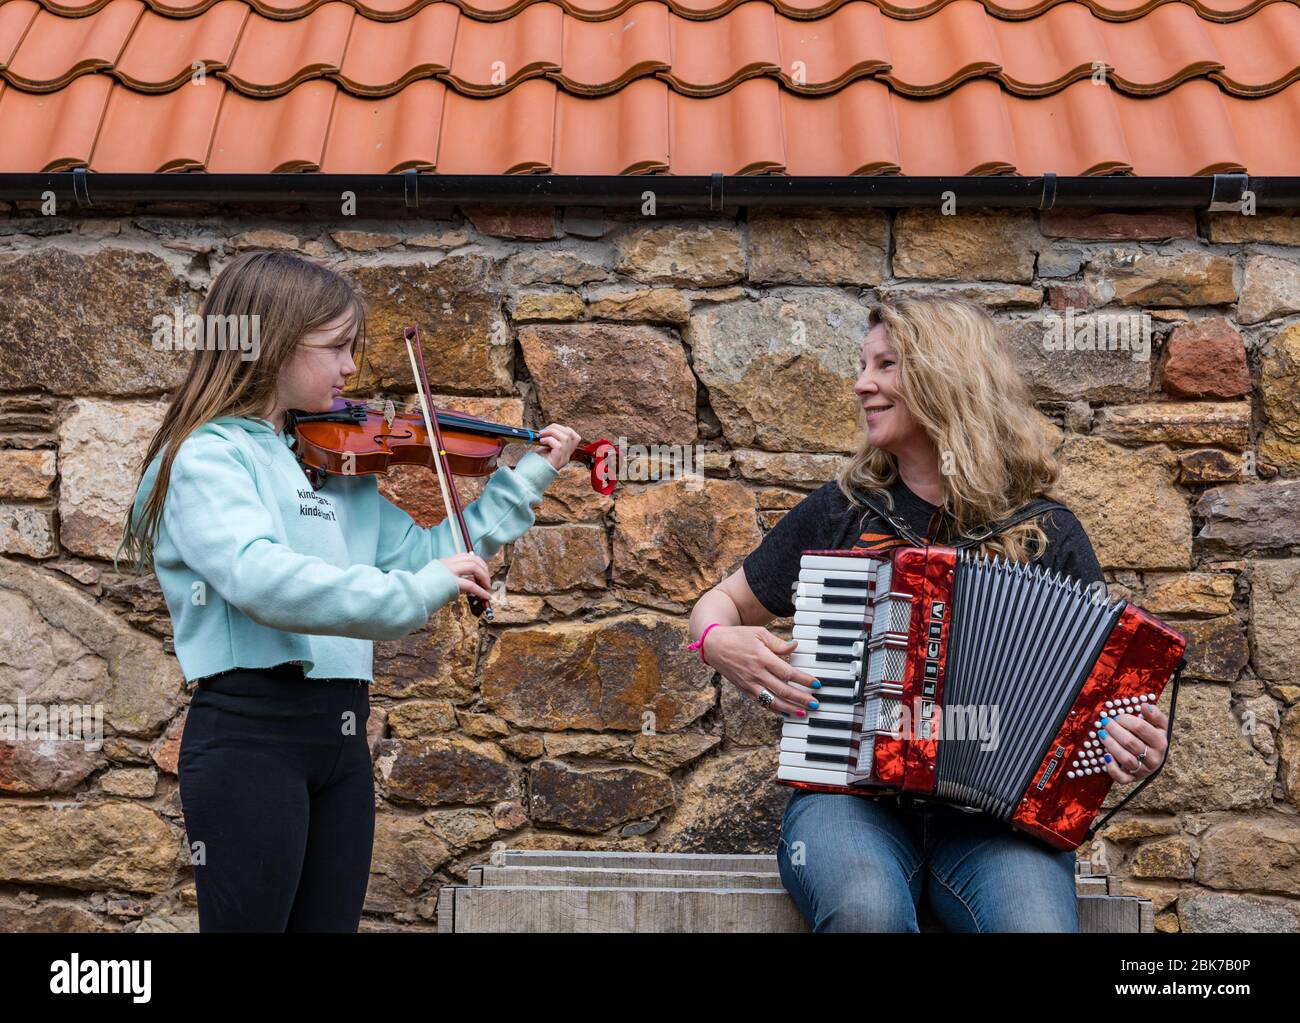 Camptoun, East Lothian, Scotland, United Kingdom. 2nd May, 2020. A community in lockdown: residents in a small rural community show what life in lockdown is like for them. Pictured: Ava, aged 10 years, and her mother, Harley, a musician, play the fiddle and accordion in the tune 'Somewhere Over the Rainbow' Stock Photo